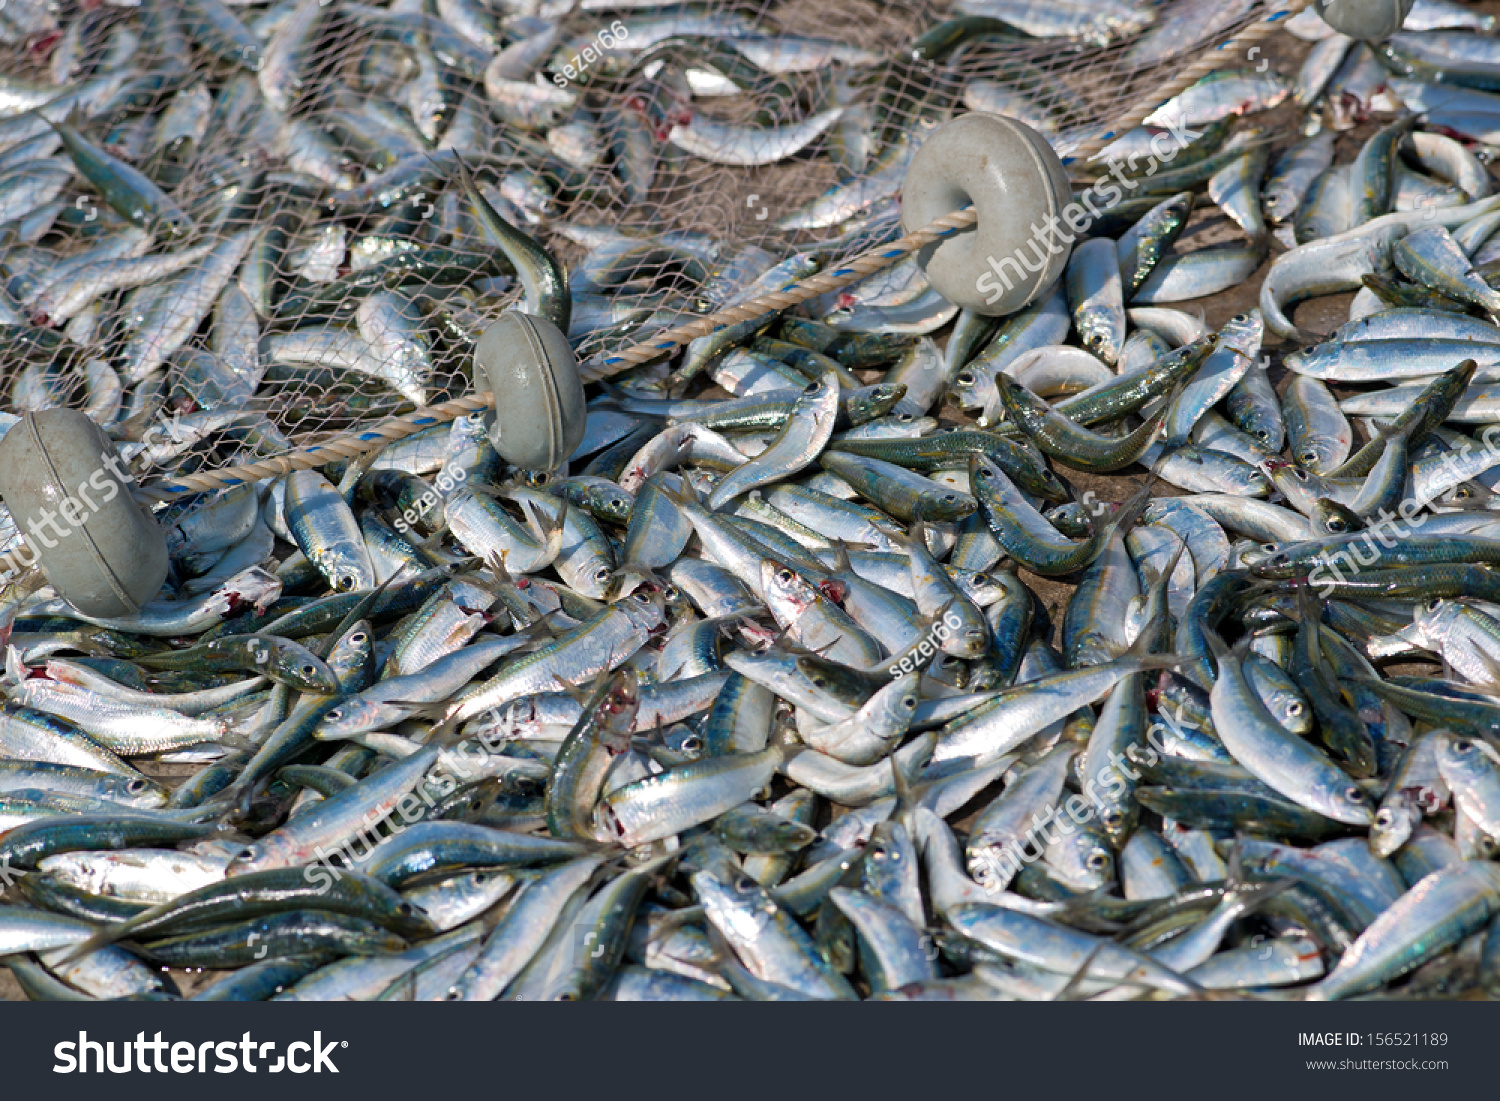 lots of fish dating fish in the sea